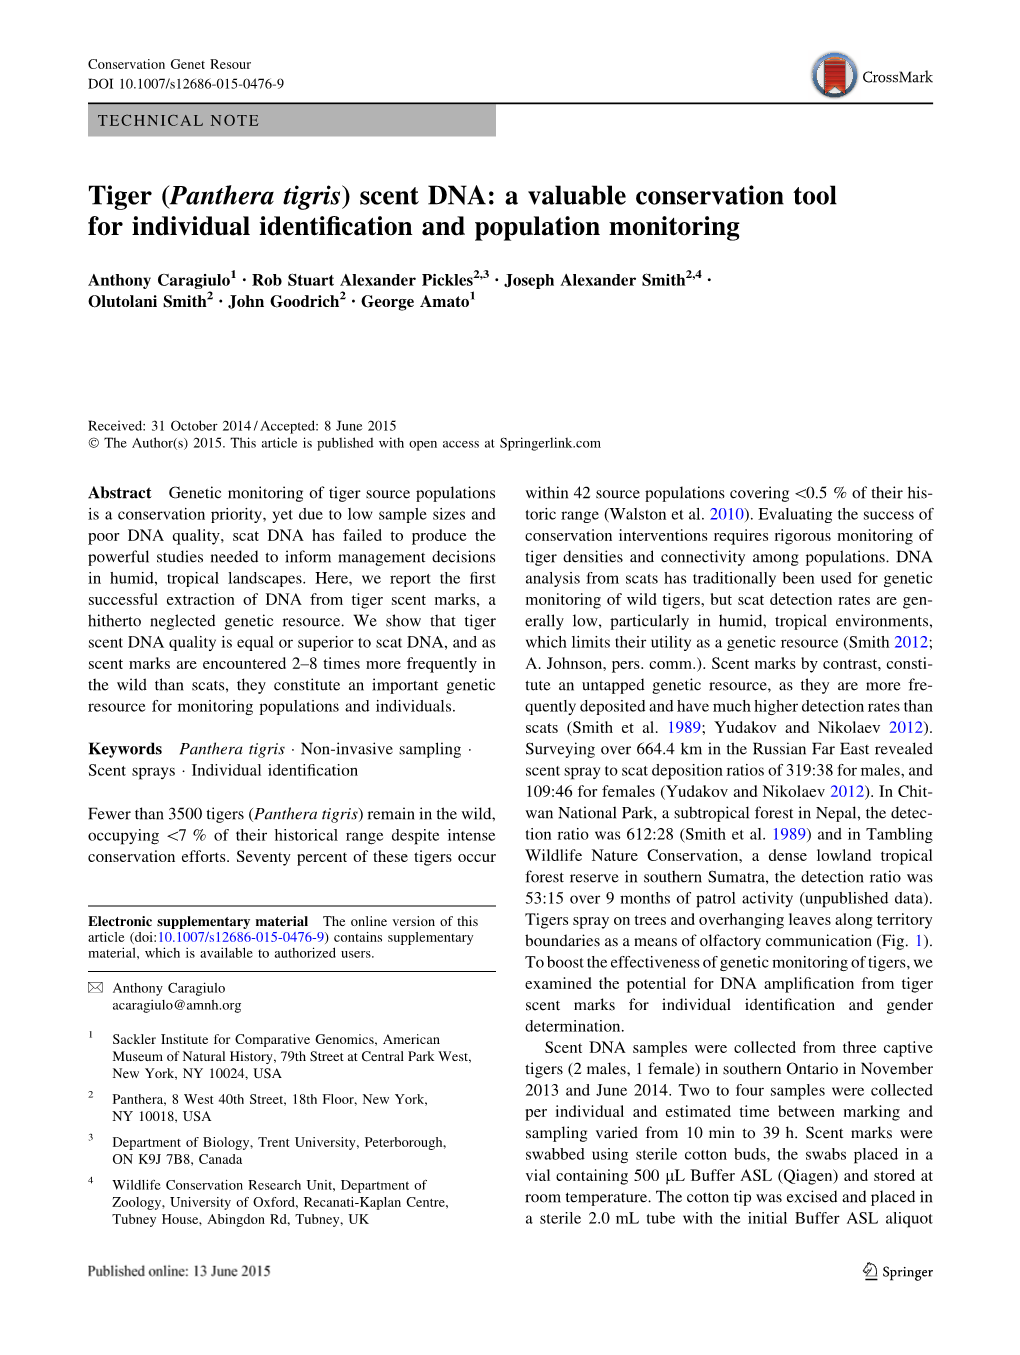 Tiger (Panthera Tigris) Scent DNA: a Valuable Conservation Tool for Individual Identiﬁcation and Population Monitoring